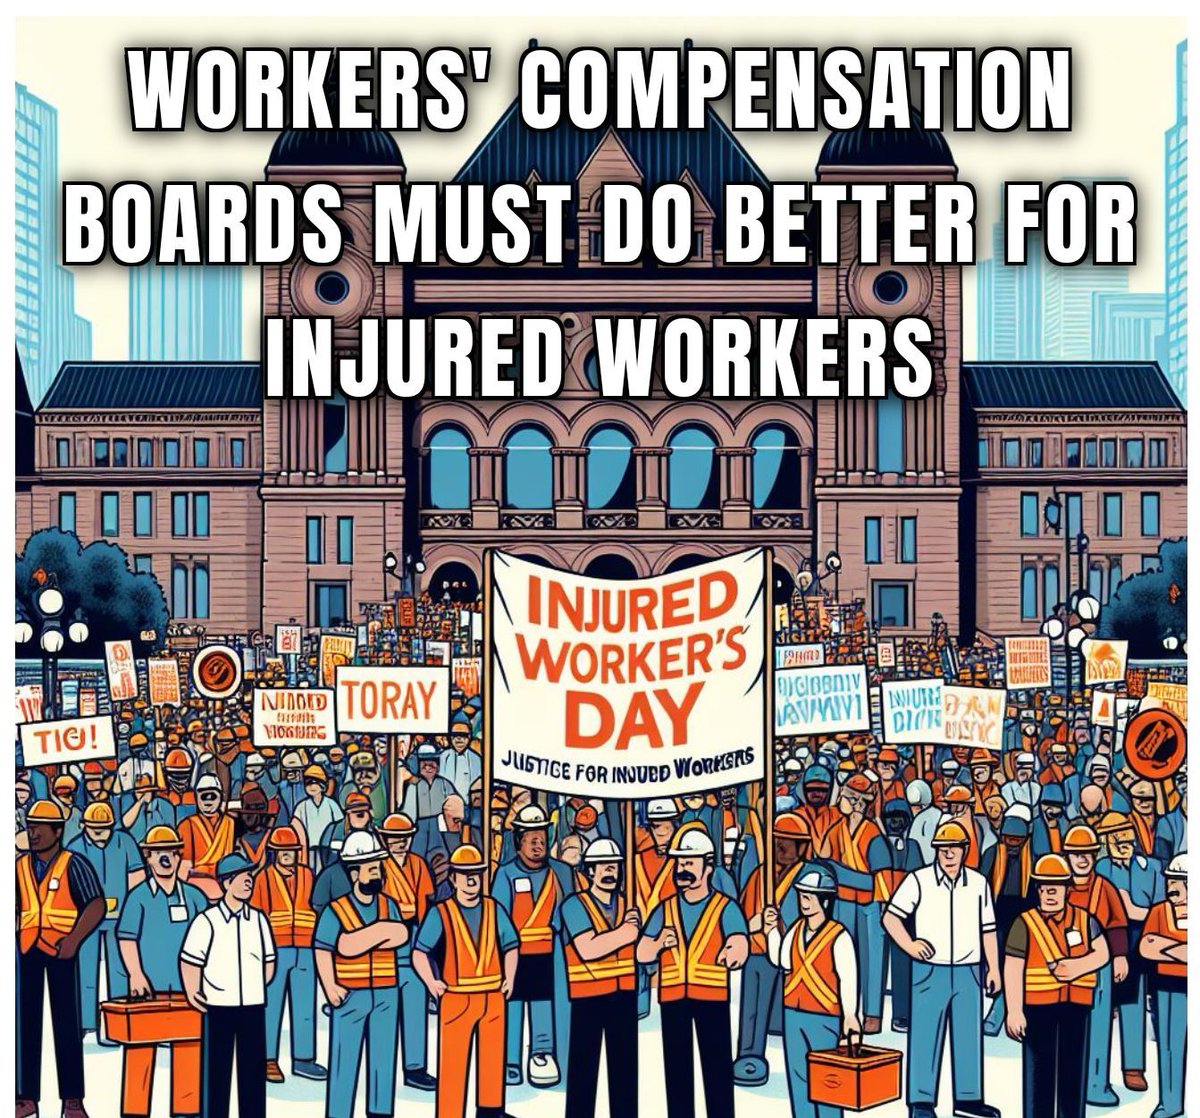 🚨 Join us in solidarity for #InjuredWorkersDay! If you are able to make it to #Toronto, come rally with us ! #ldnont at the NW corner of Victoria Park on June 1st, 11am-1pm,  Let's raise our voices together! ✊ #WorkersRights #Solidarity #EnoughIsEnough #Justice4Workers #onlab